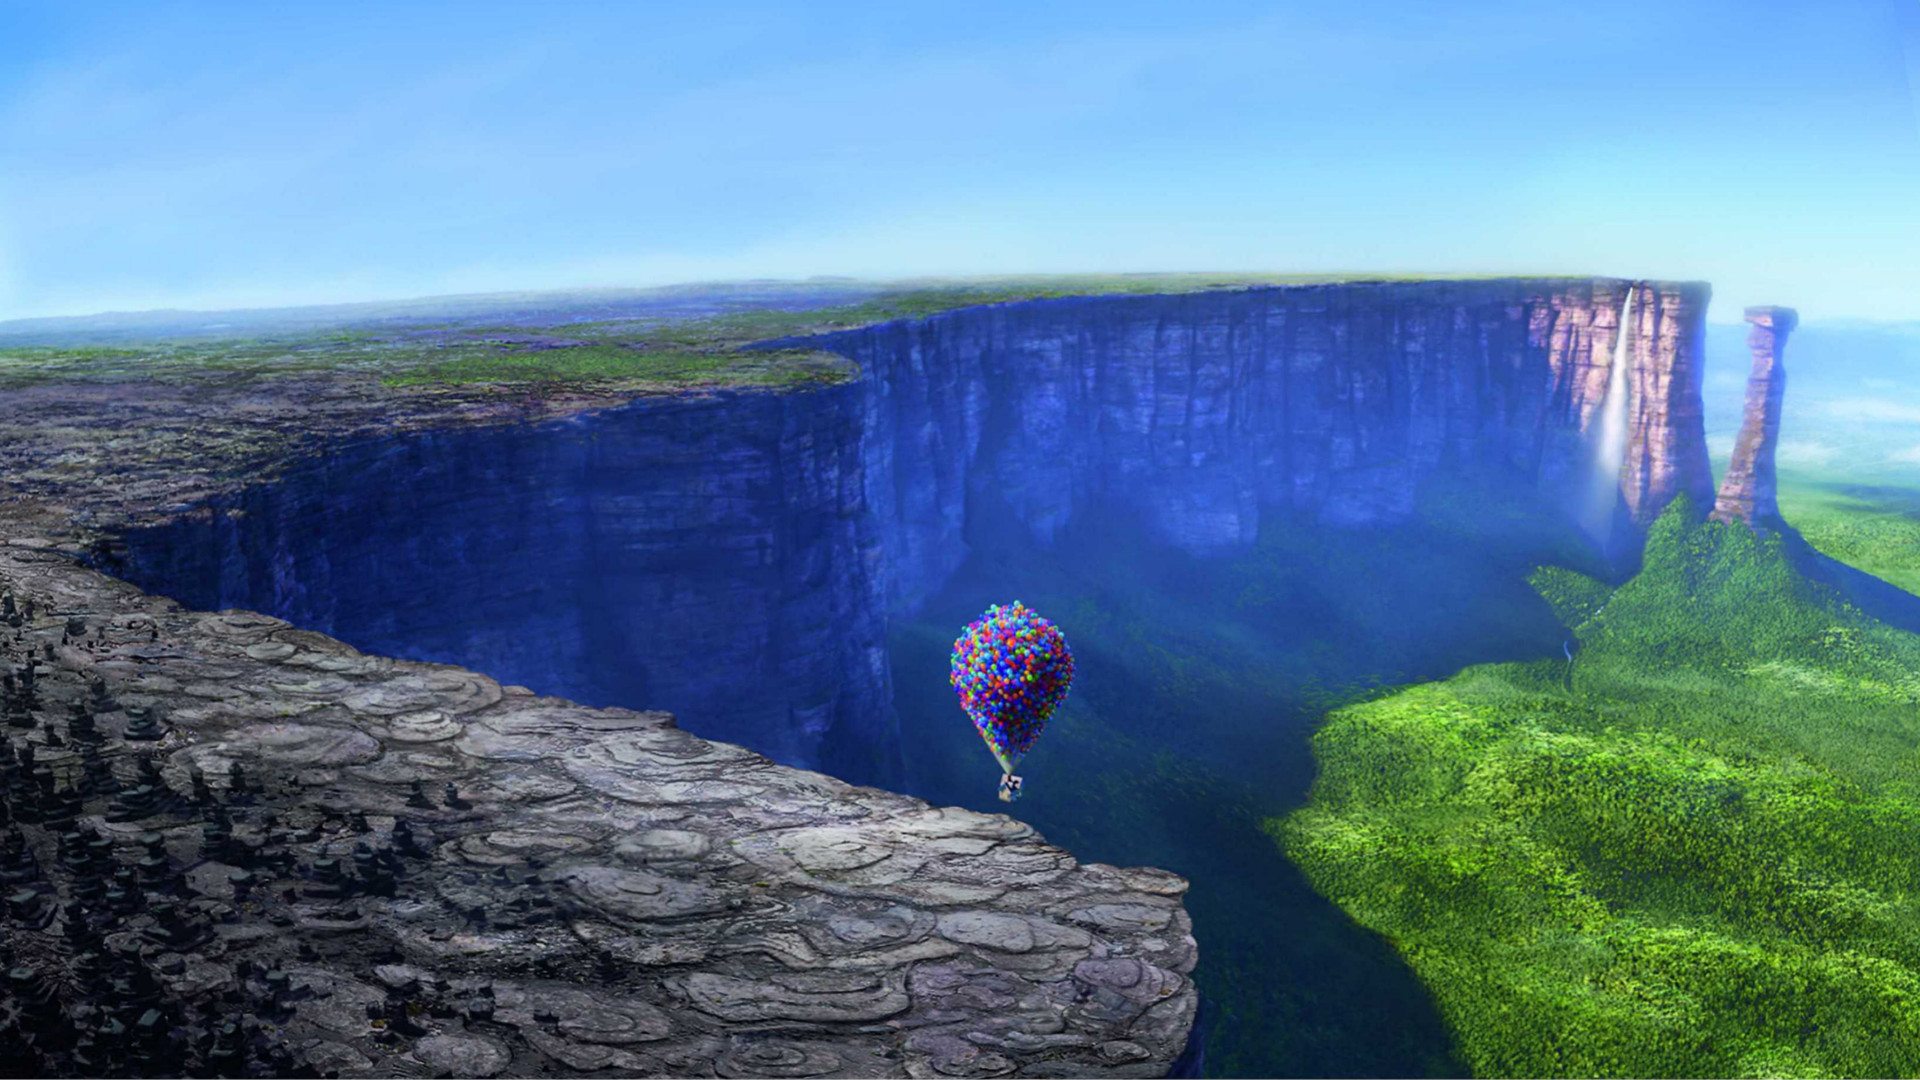 Movie Up HD Wallpaper | Background Image